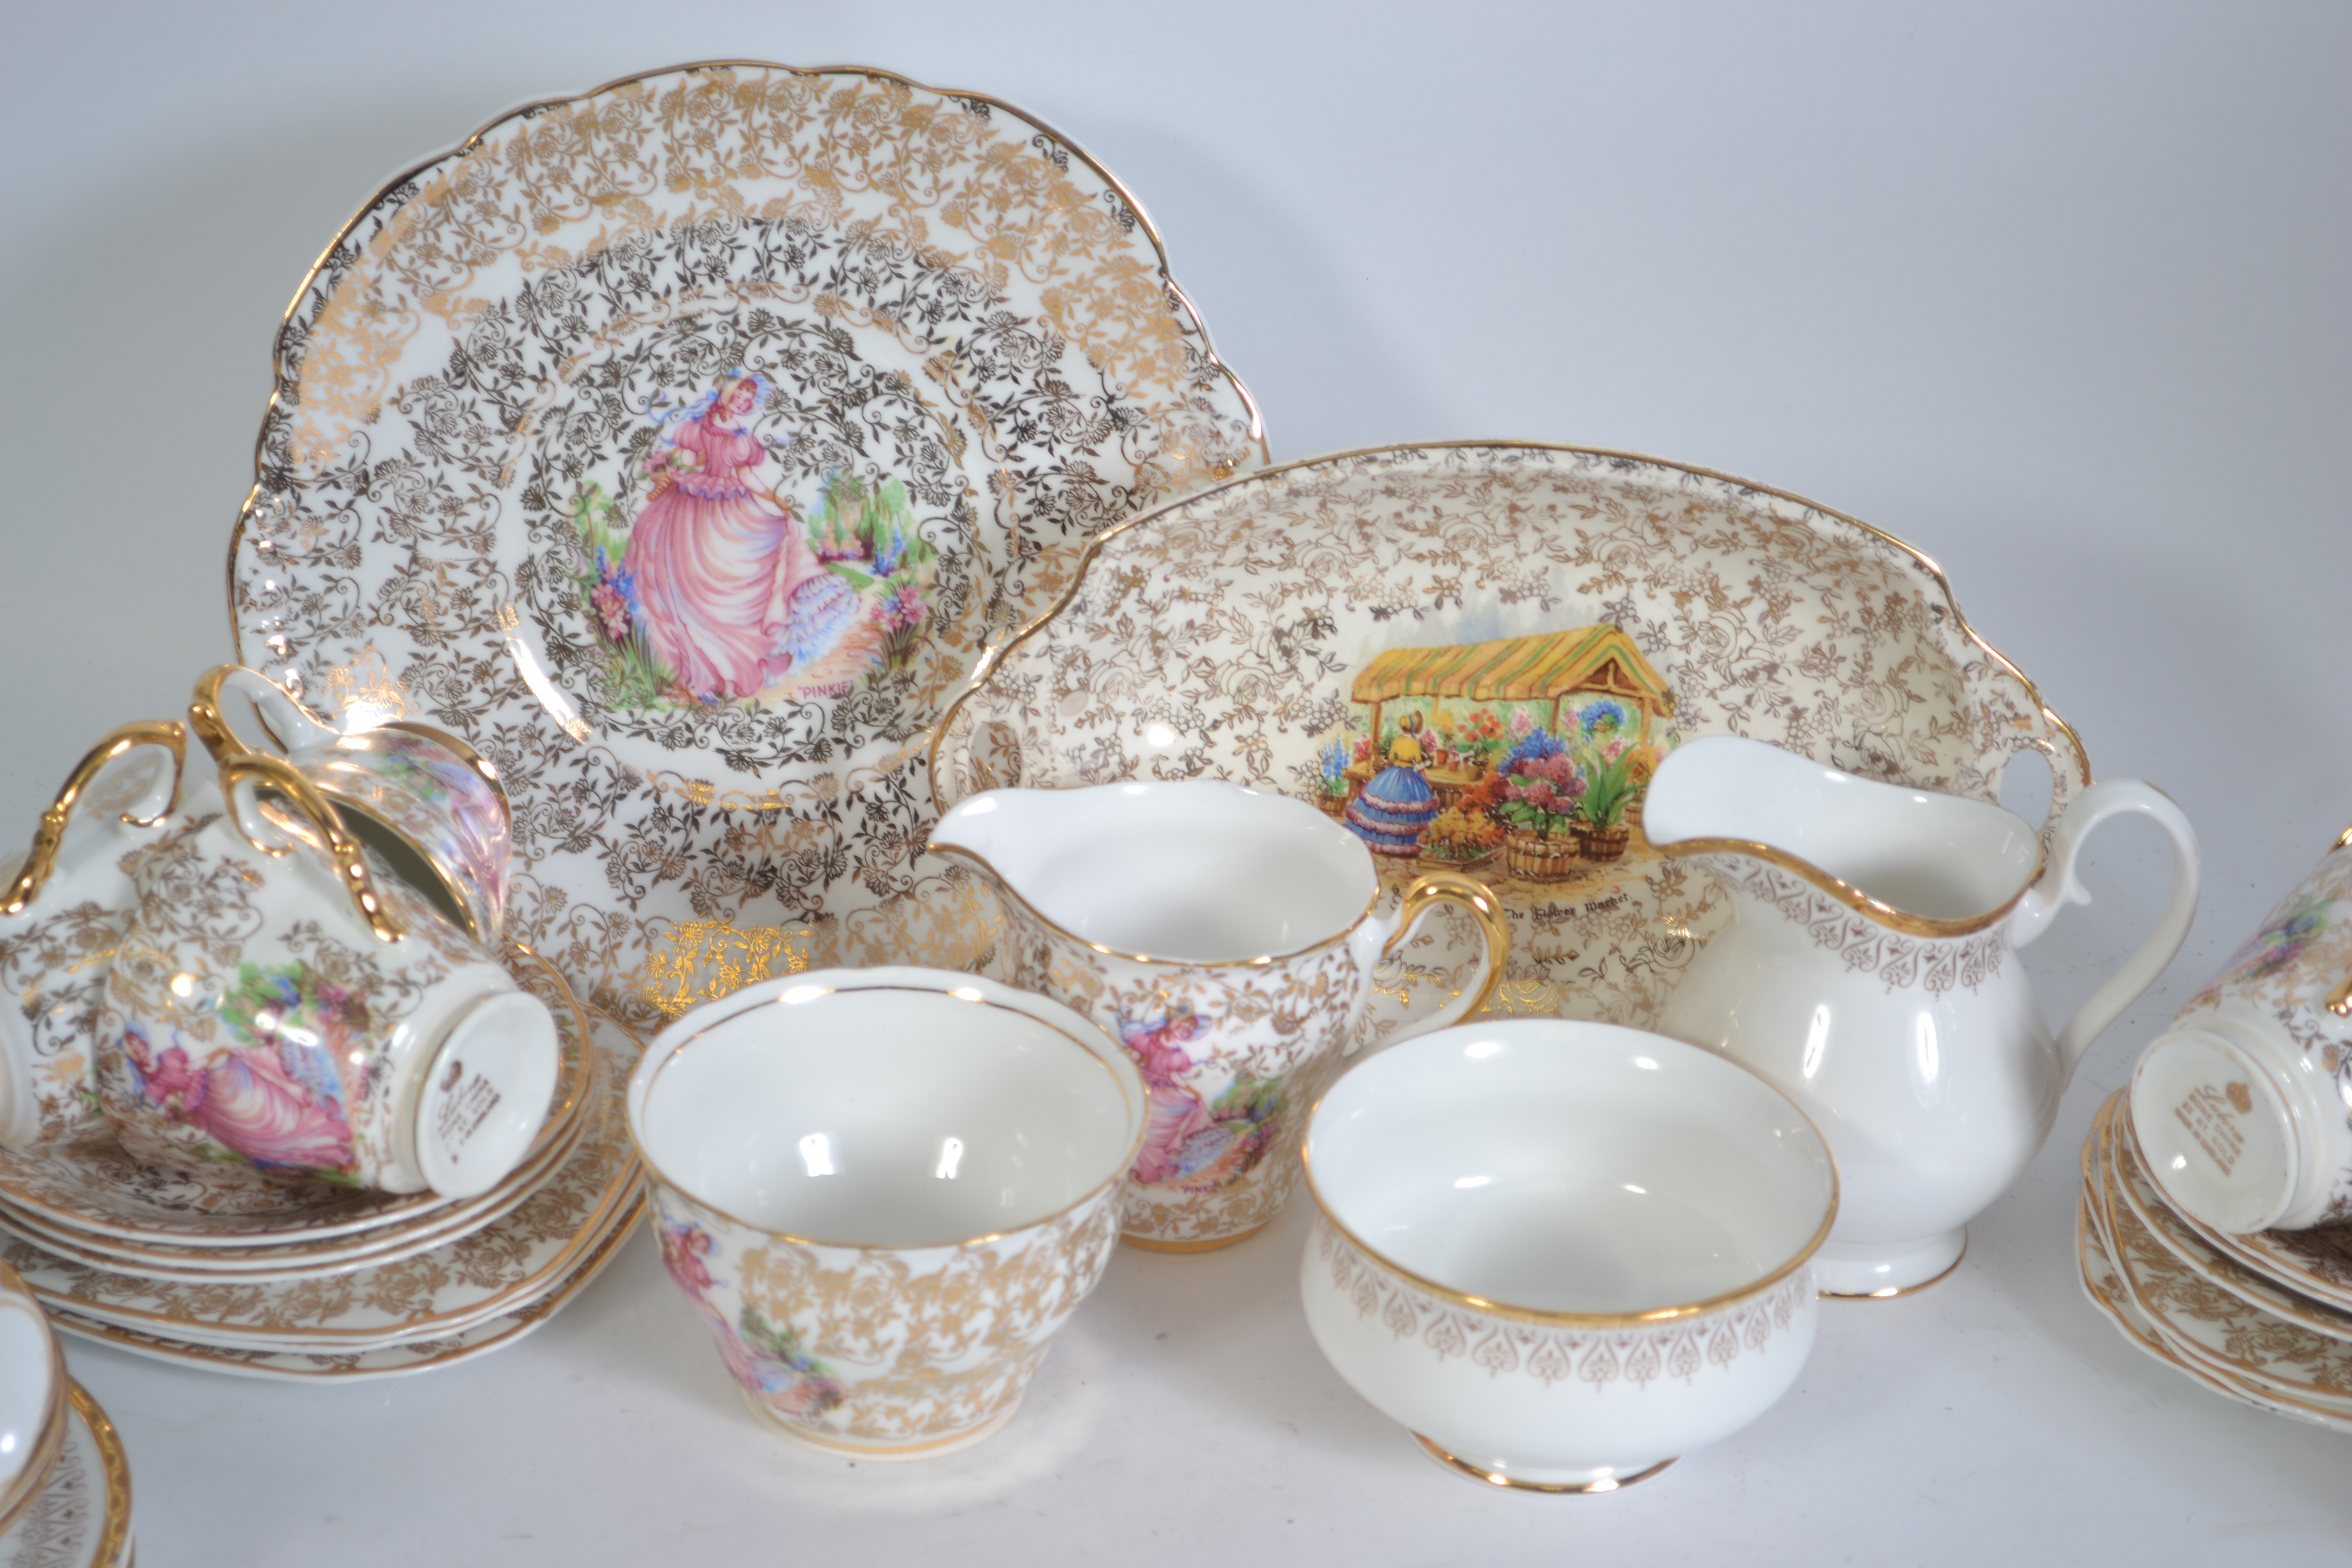 A Royal Albert China tea service in the Burlington pattern consisting of cups, saucers, side plates, - Image 2 of 4